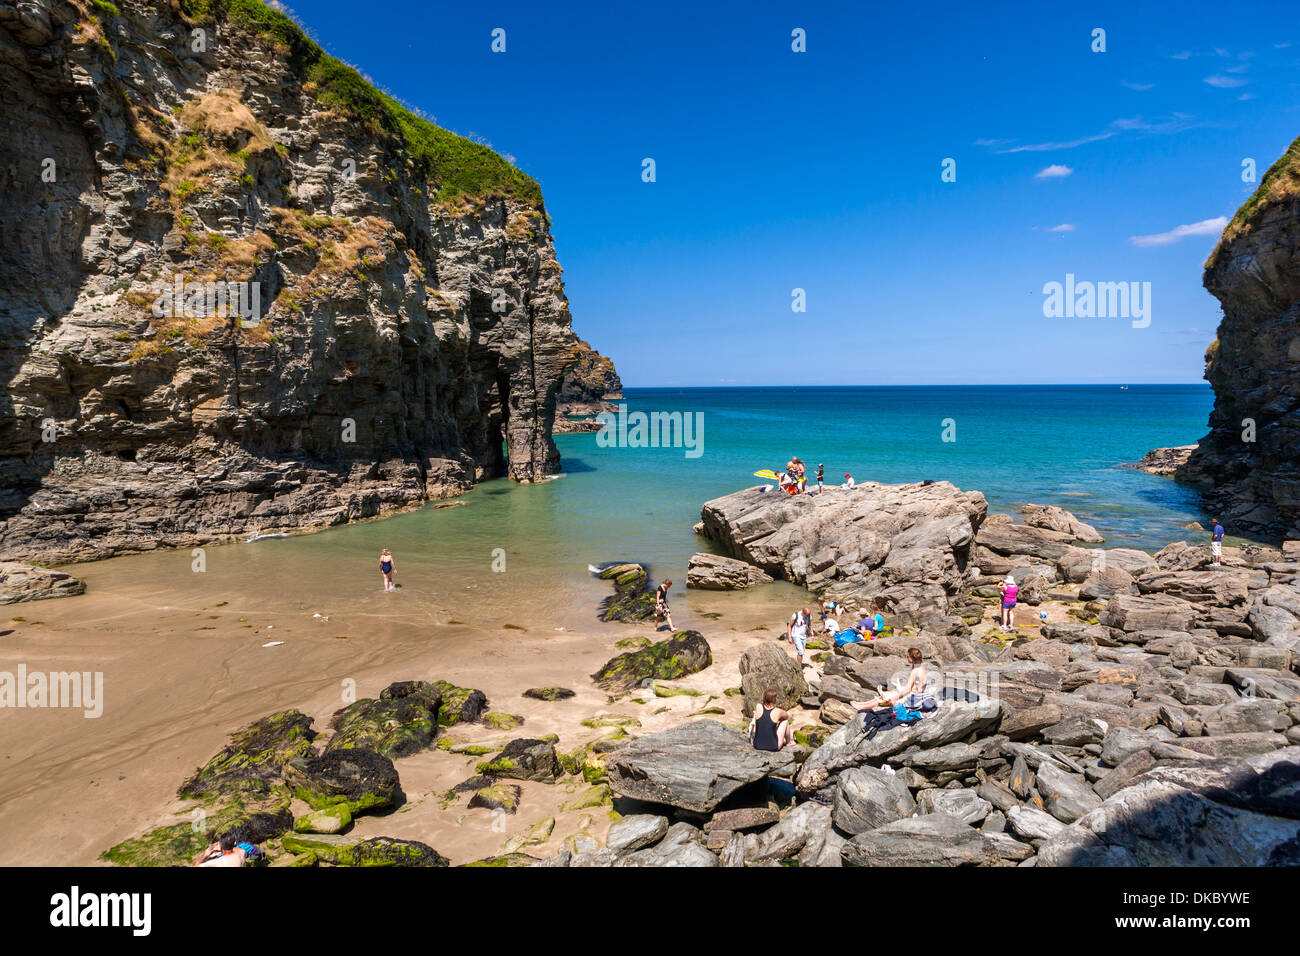 View over Bossiney Haven on the north coast of Cornwall, England, UK, Europe. Stock Photo